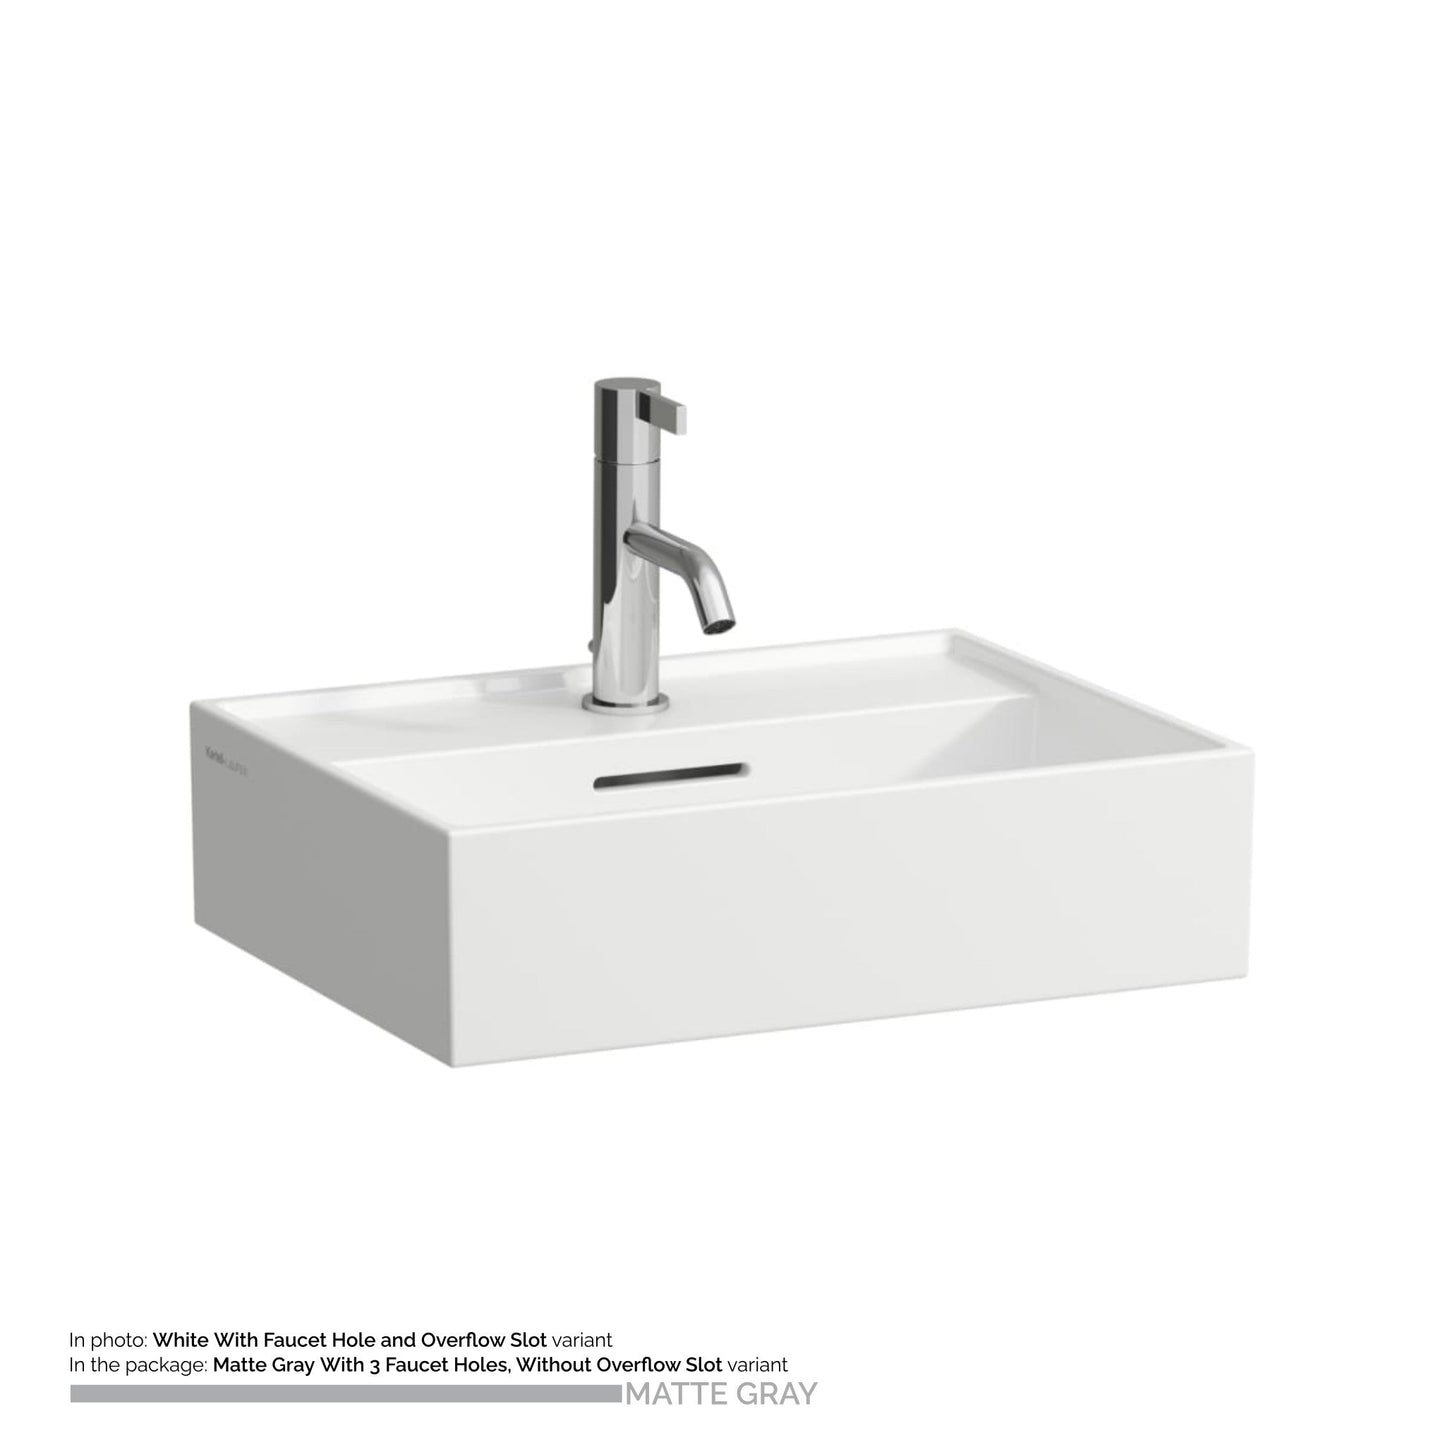 Laufen Kartell 18" x 13" Matte Gray Wall-Mounted Bathroom Sink With 3 Faucet Holes